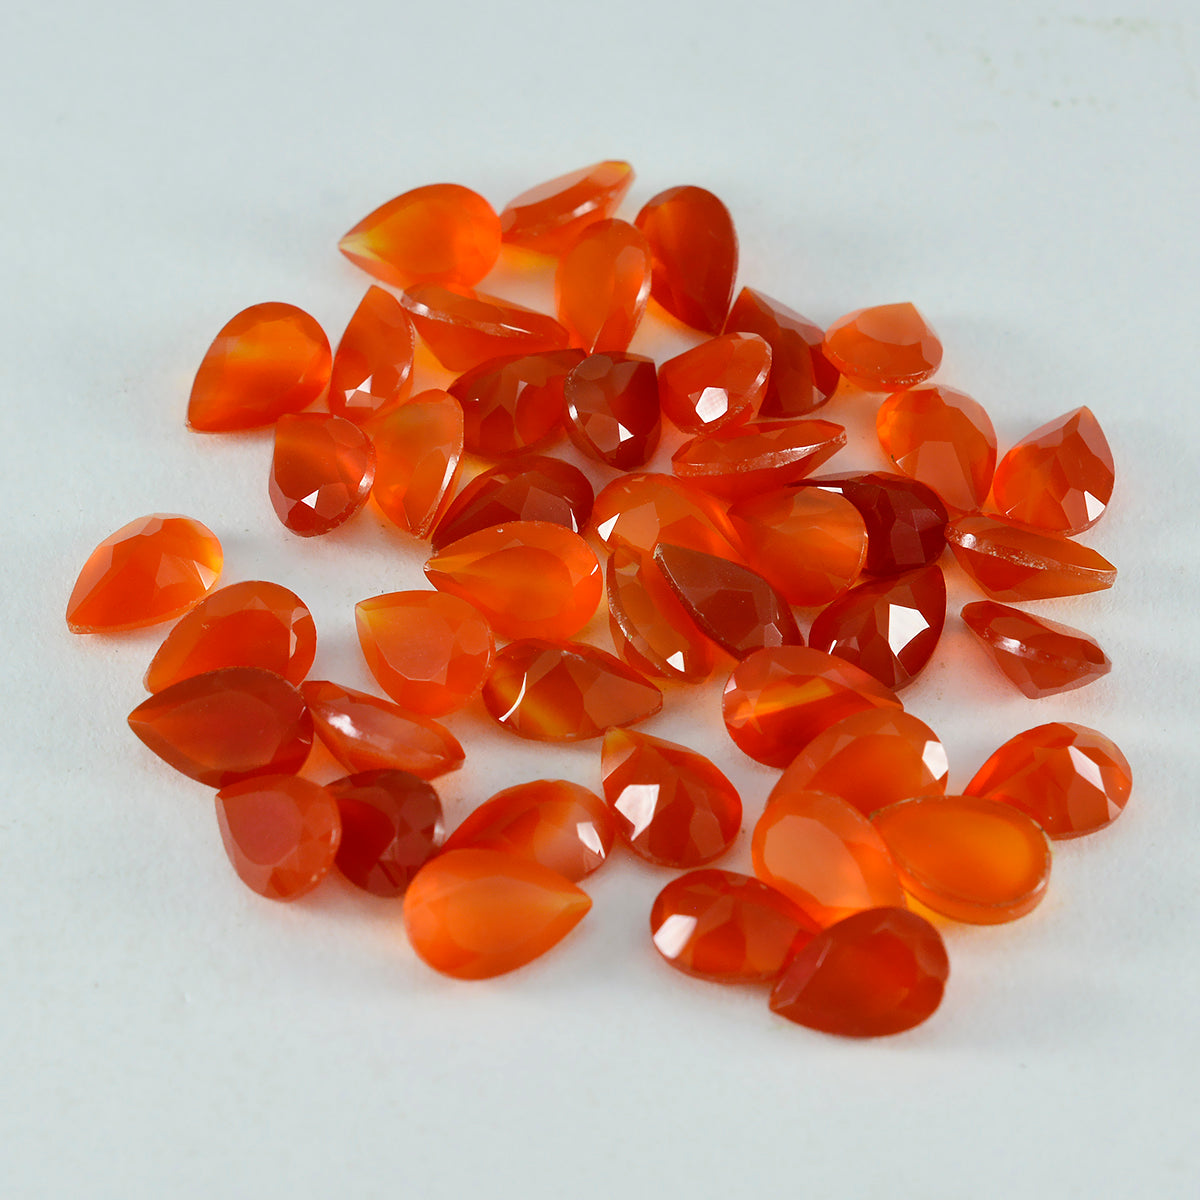 Riyogems 1PC Natural Red Onyx Faceted 7x10 mm Pear Shape awesome Quality Gem